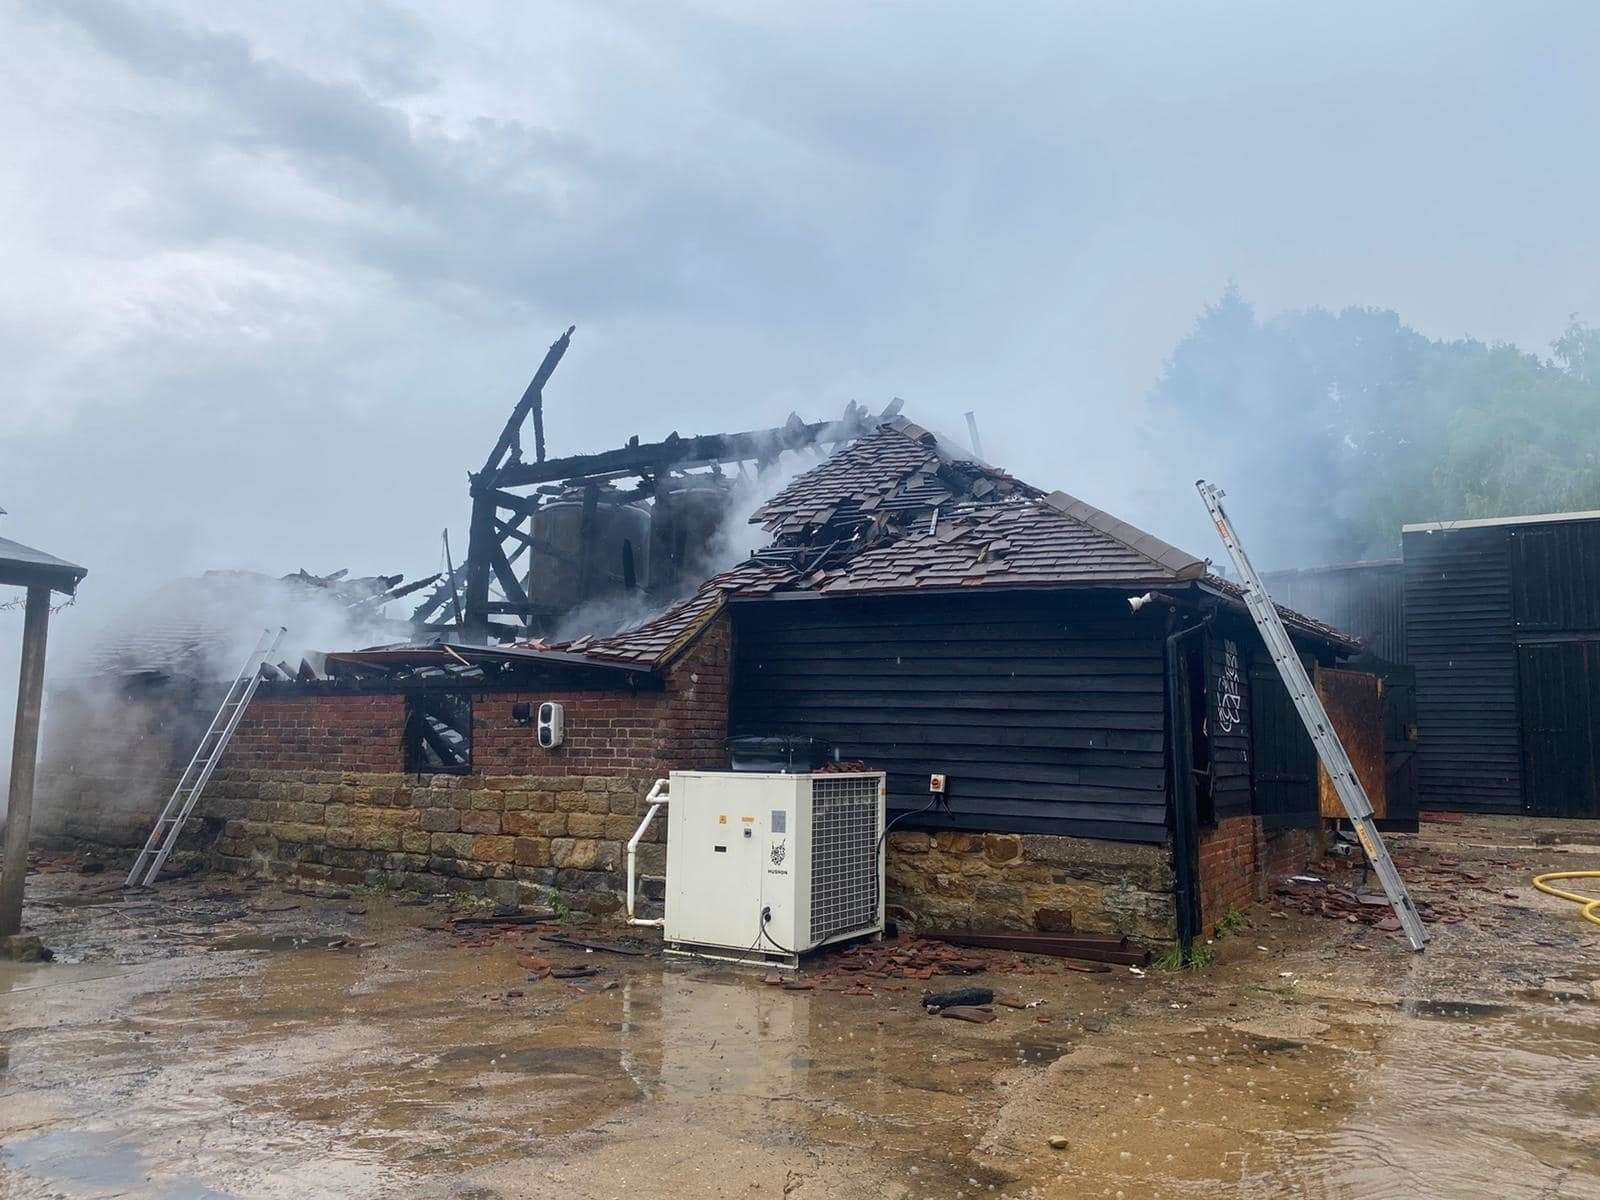 The Good Things Brewery in Tunbridge Wells burnt down after being struck by lightning